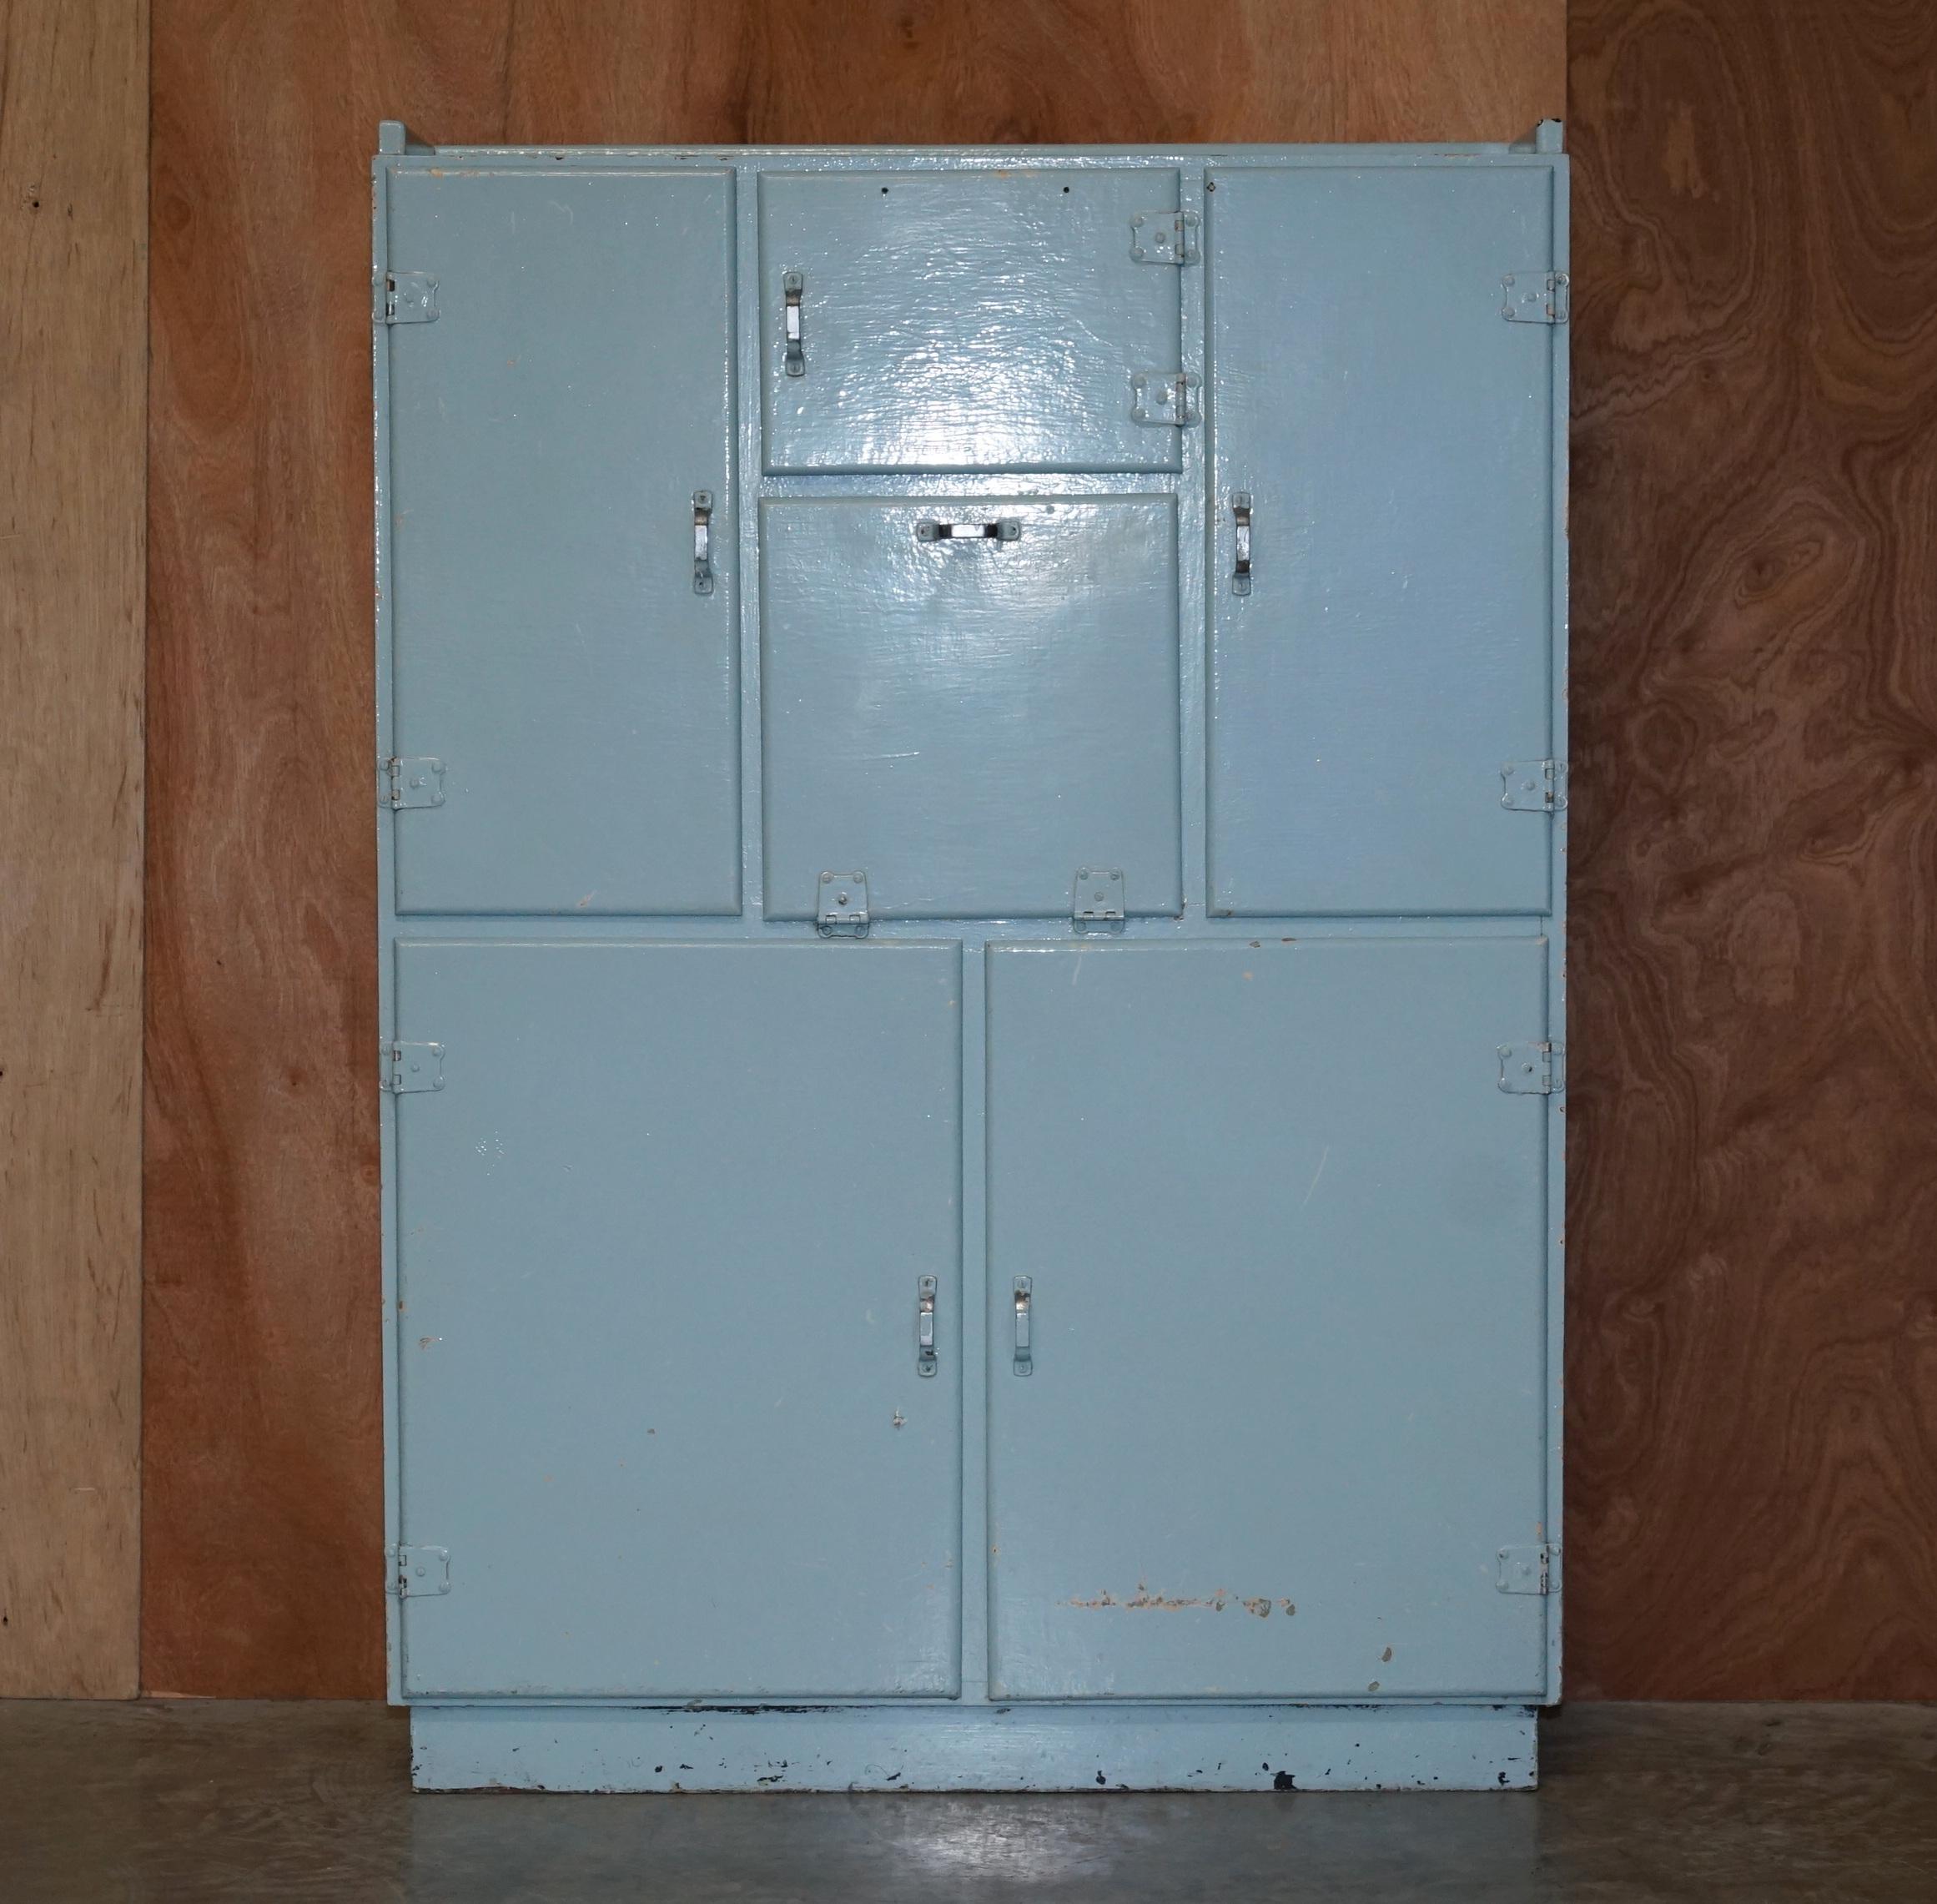 We are delighted to offer this very cool and collectable retro circa 1950’s duck egg blue kitchen larder cupboard.

A good looking well made and decorative piece, it has a solid wood frame with some of the sections being zink lined to keep them